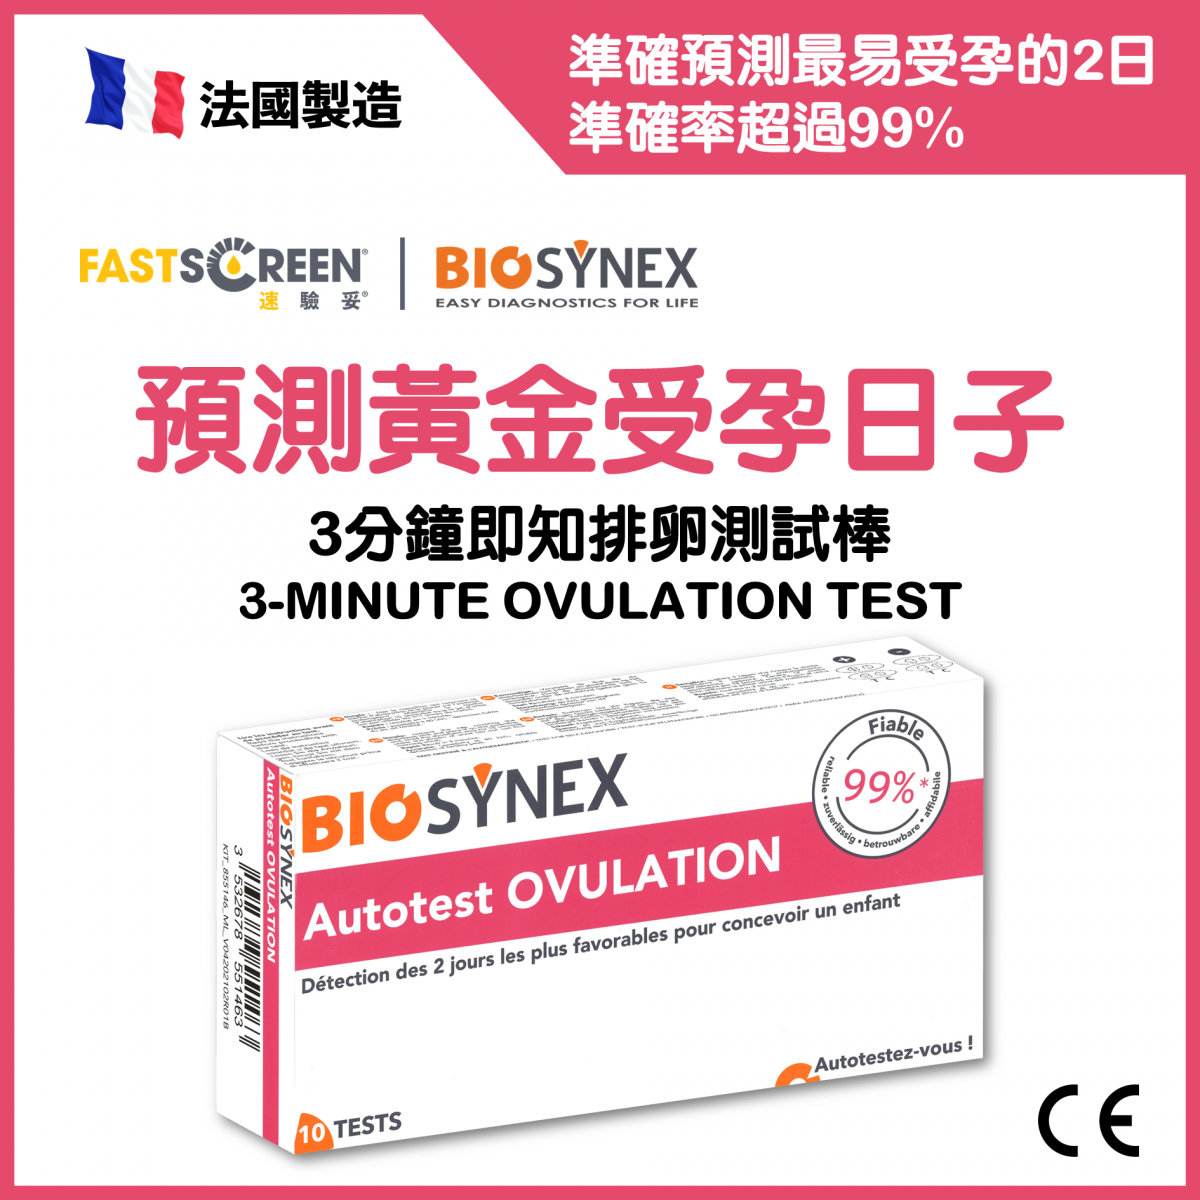 3-minute ovulation test (10 tests) | Predict your 2 most fertile days